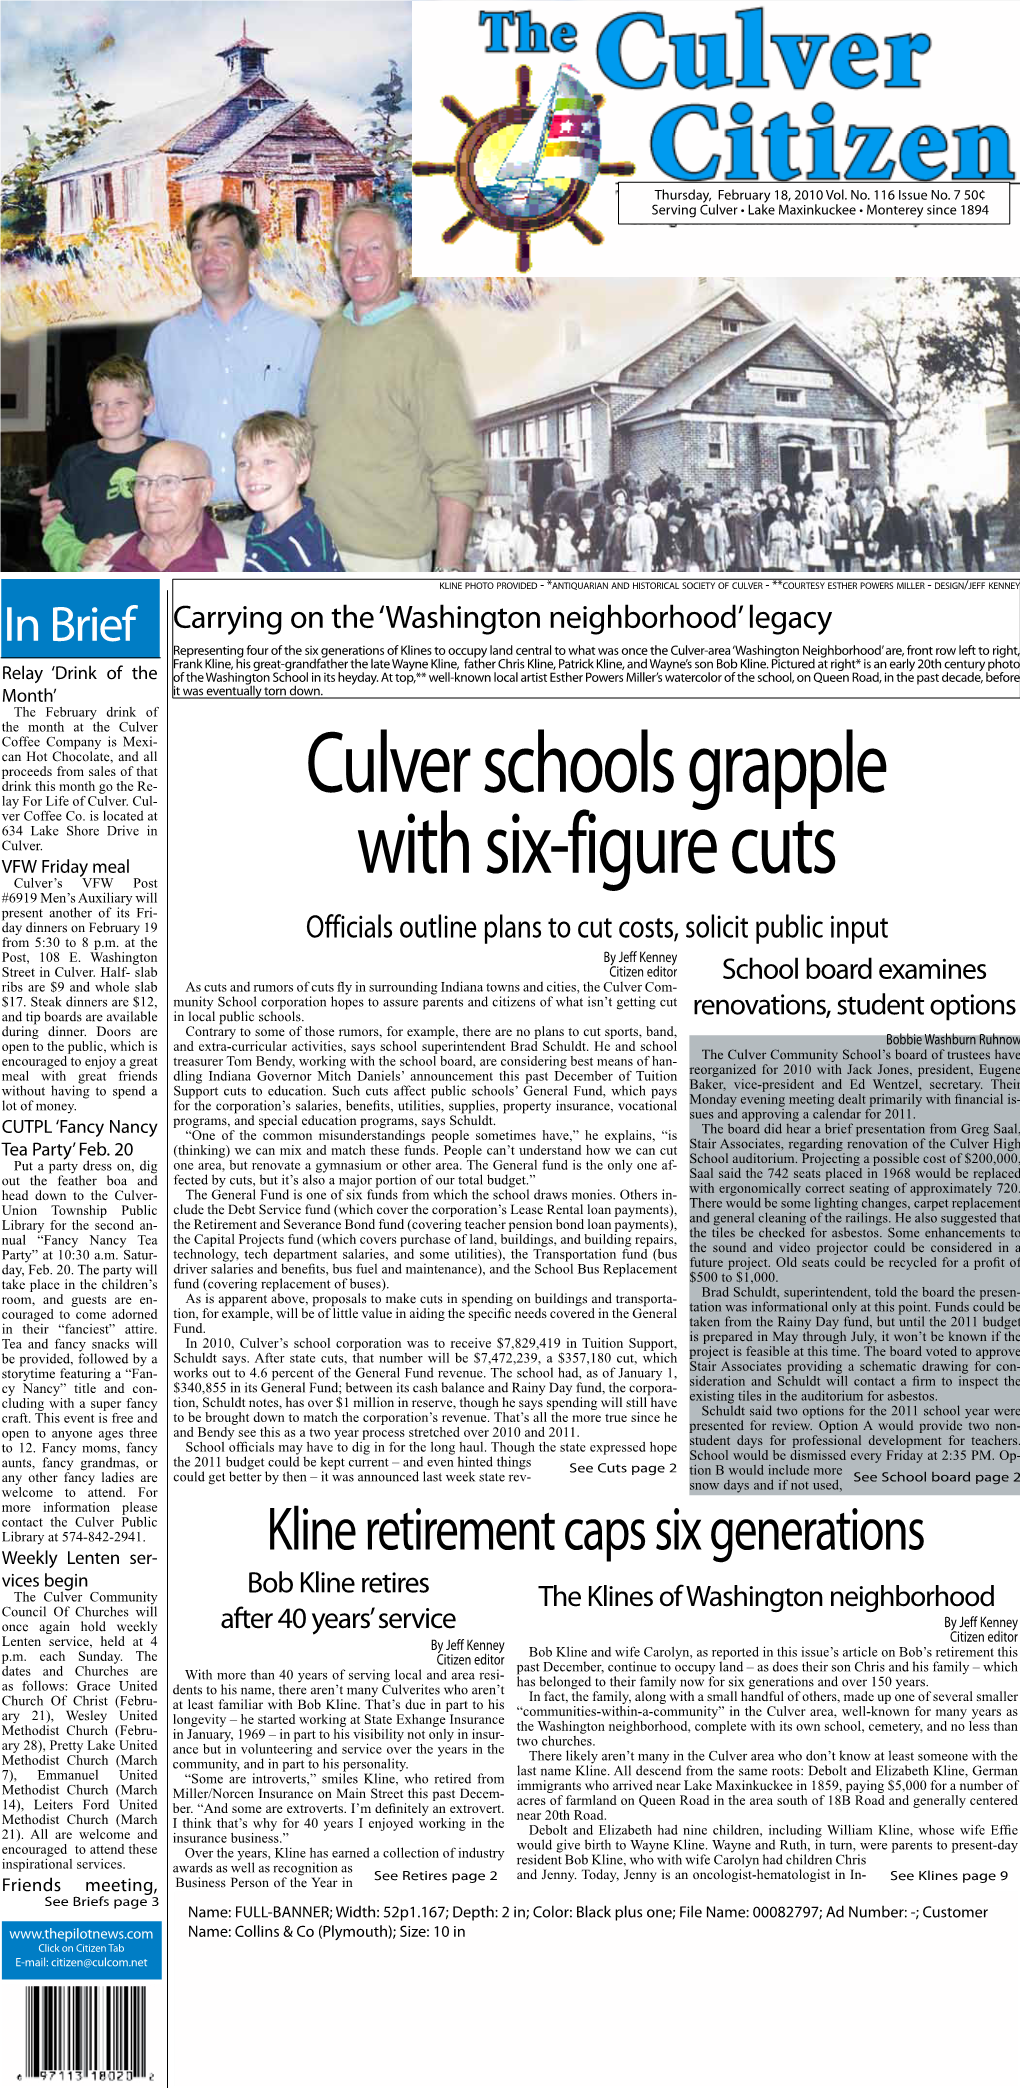 Culver Schools Grapple with Six-Figure Cuts